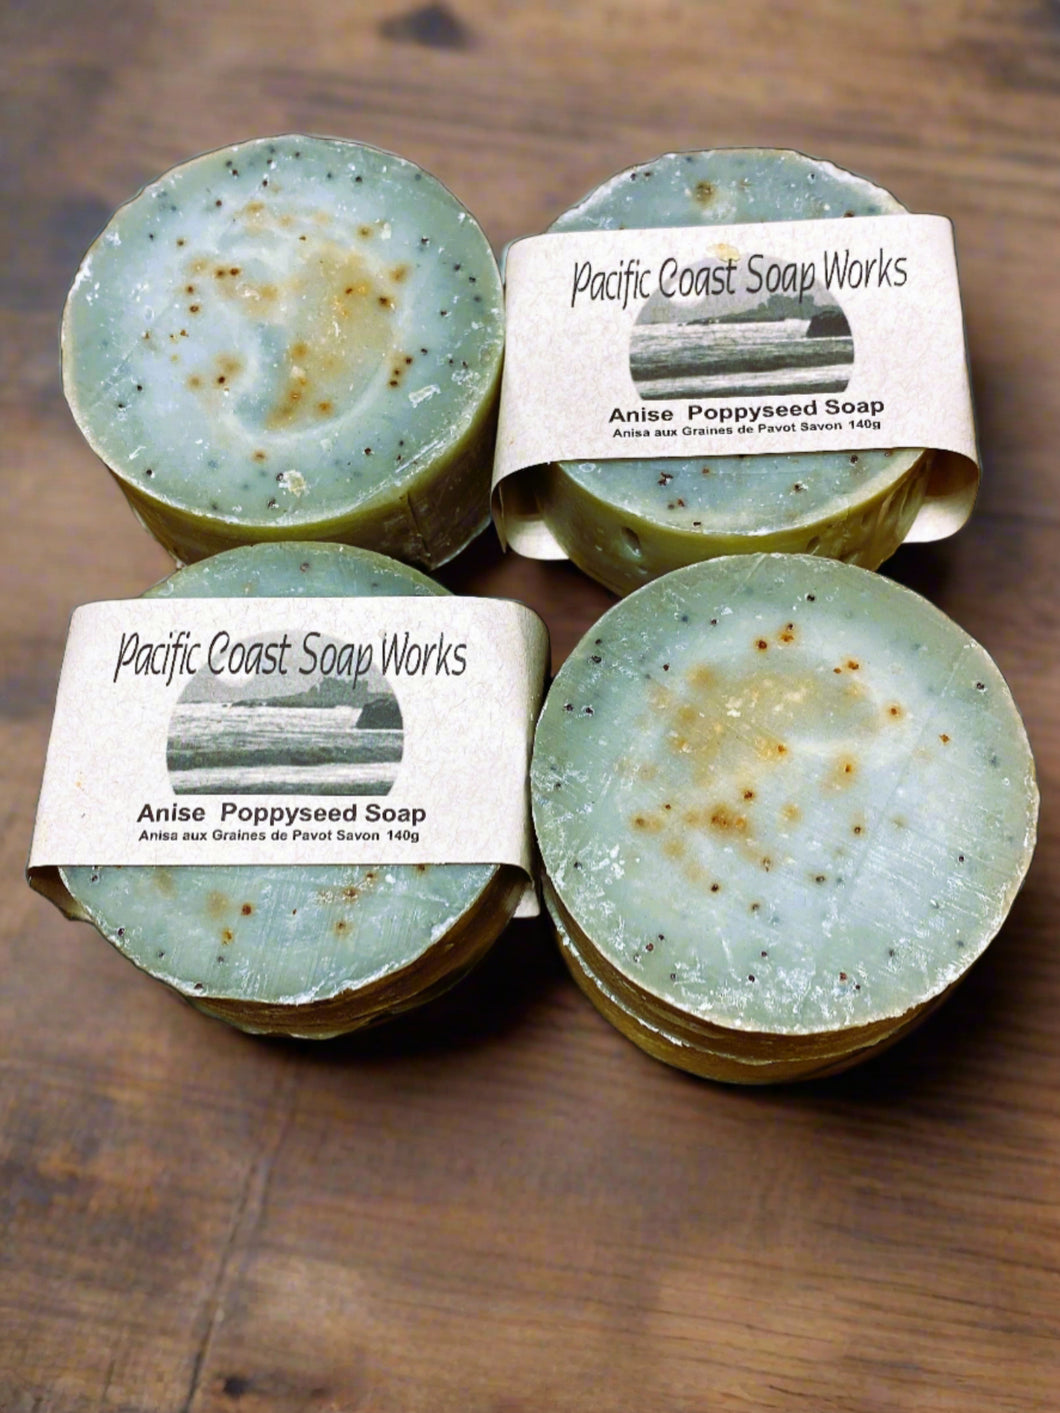 anise, poppyseed, licorice, cold press soap, natural, hand crafted